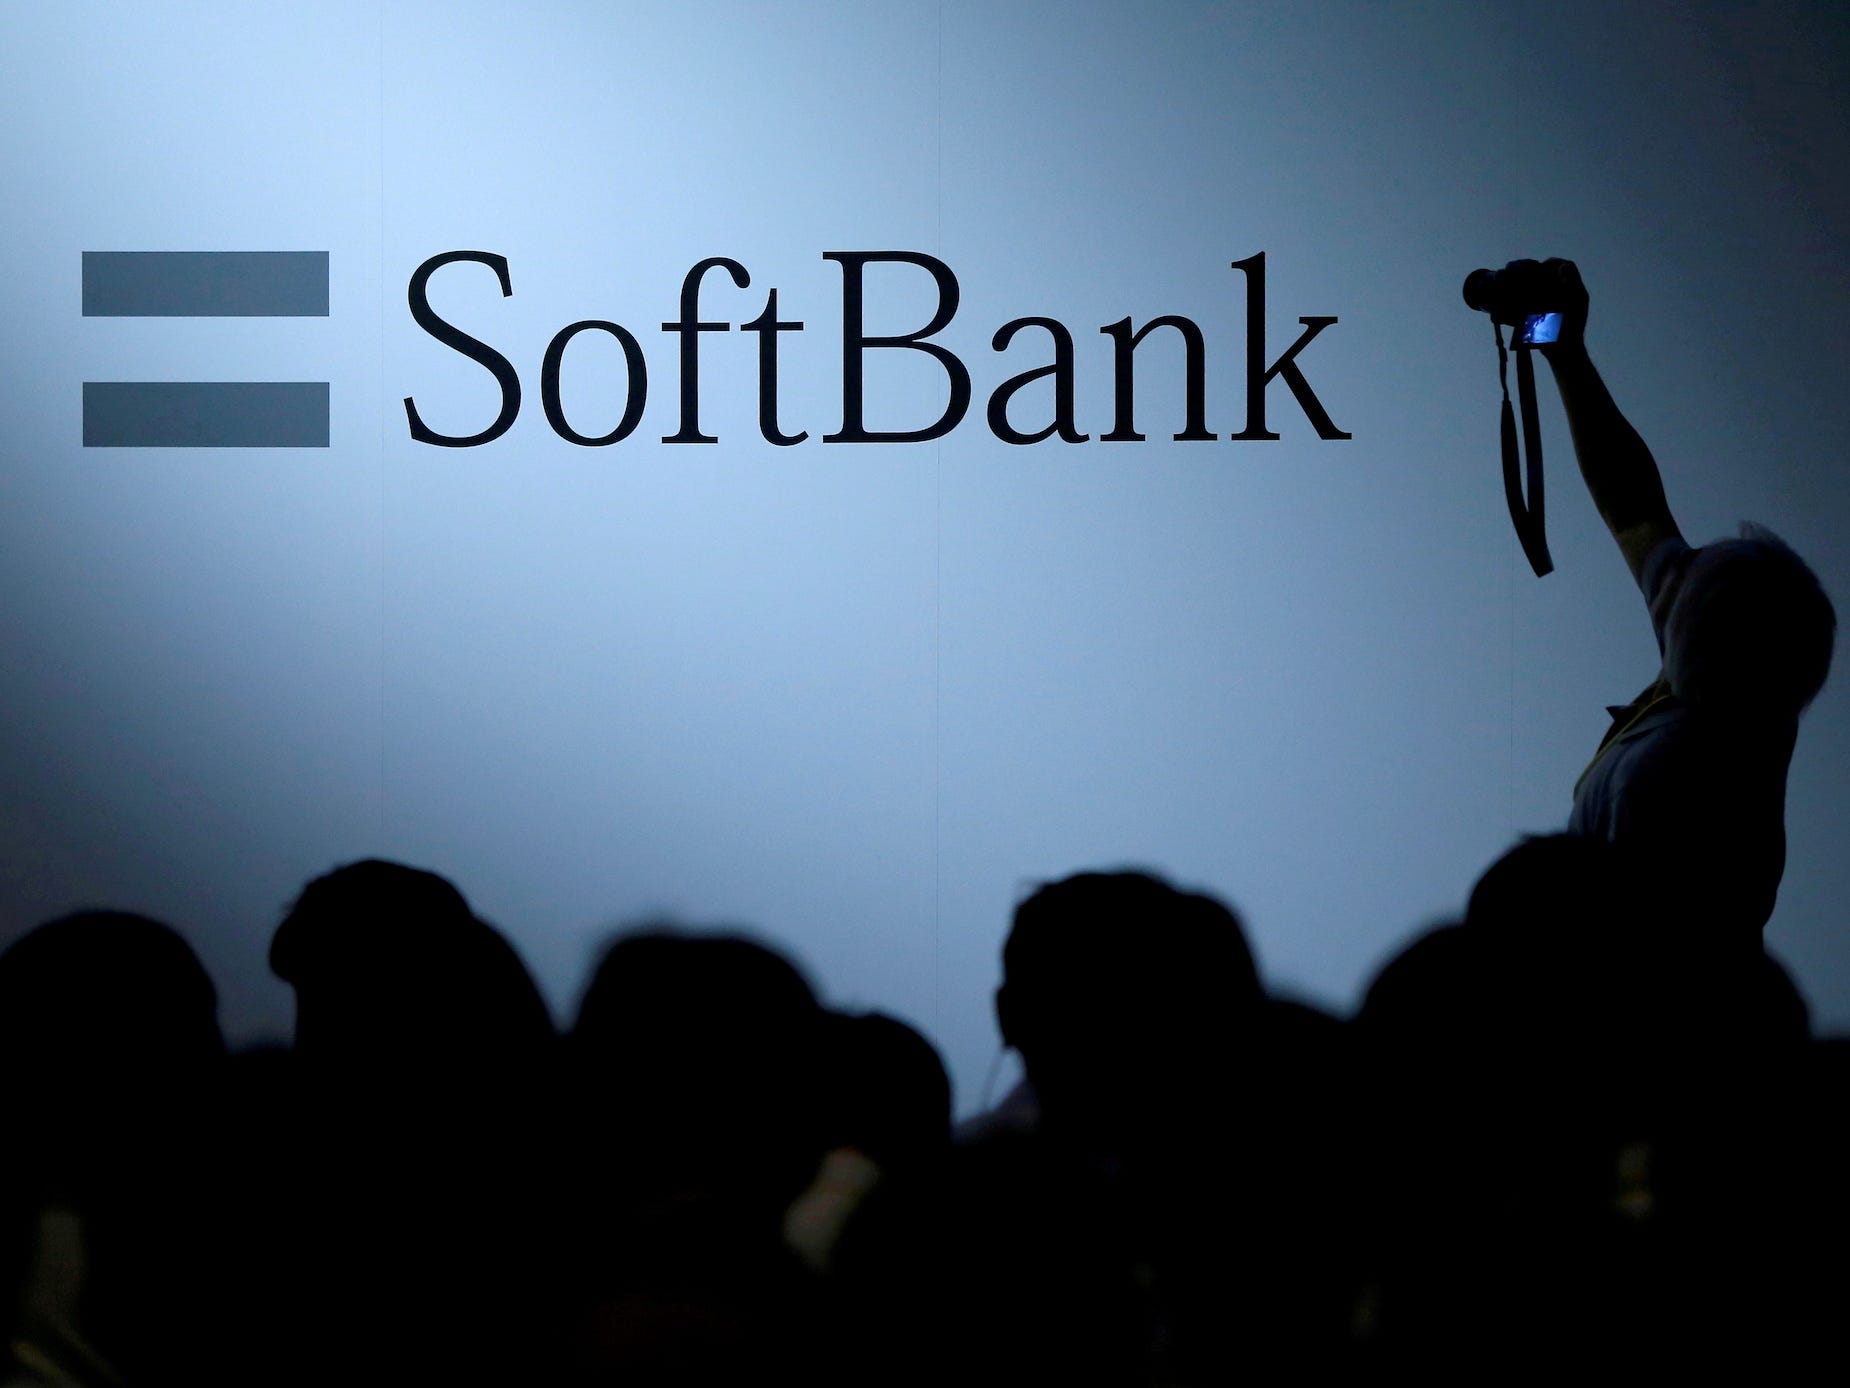 The logo of SoftBank Group Corp is displayed at SoftBank World 2017 conference in Tokyo, Japan, July 20, 2017.